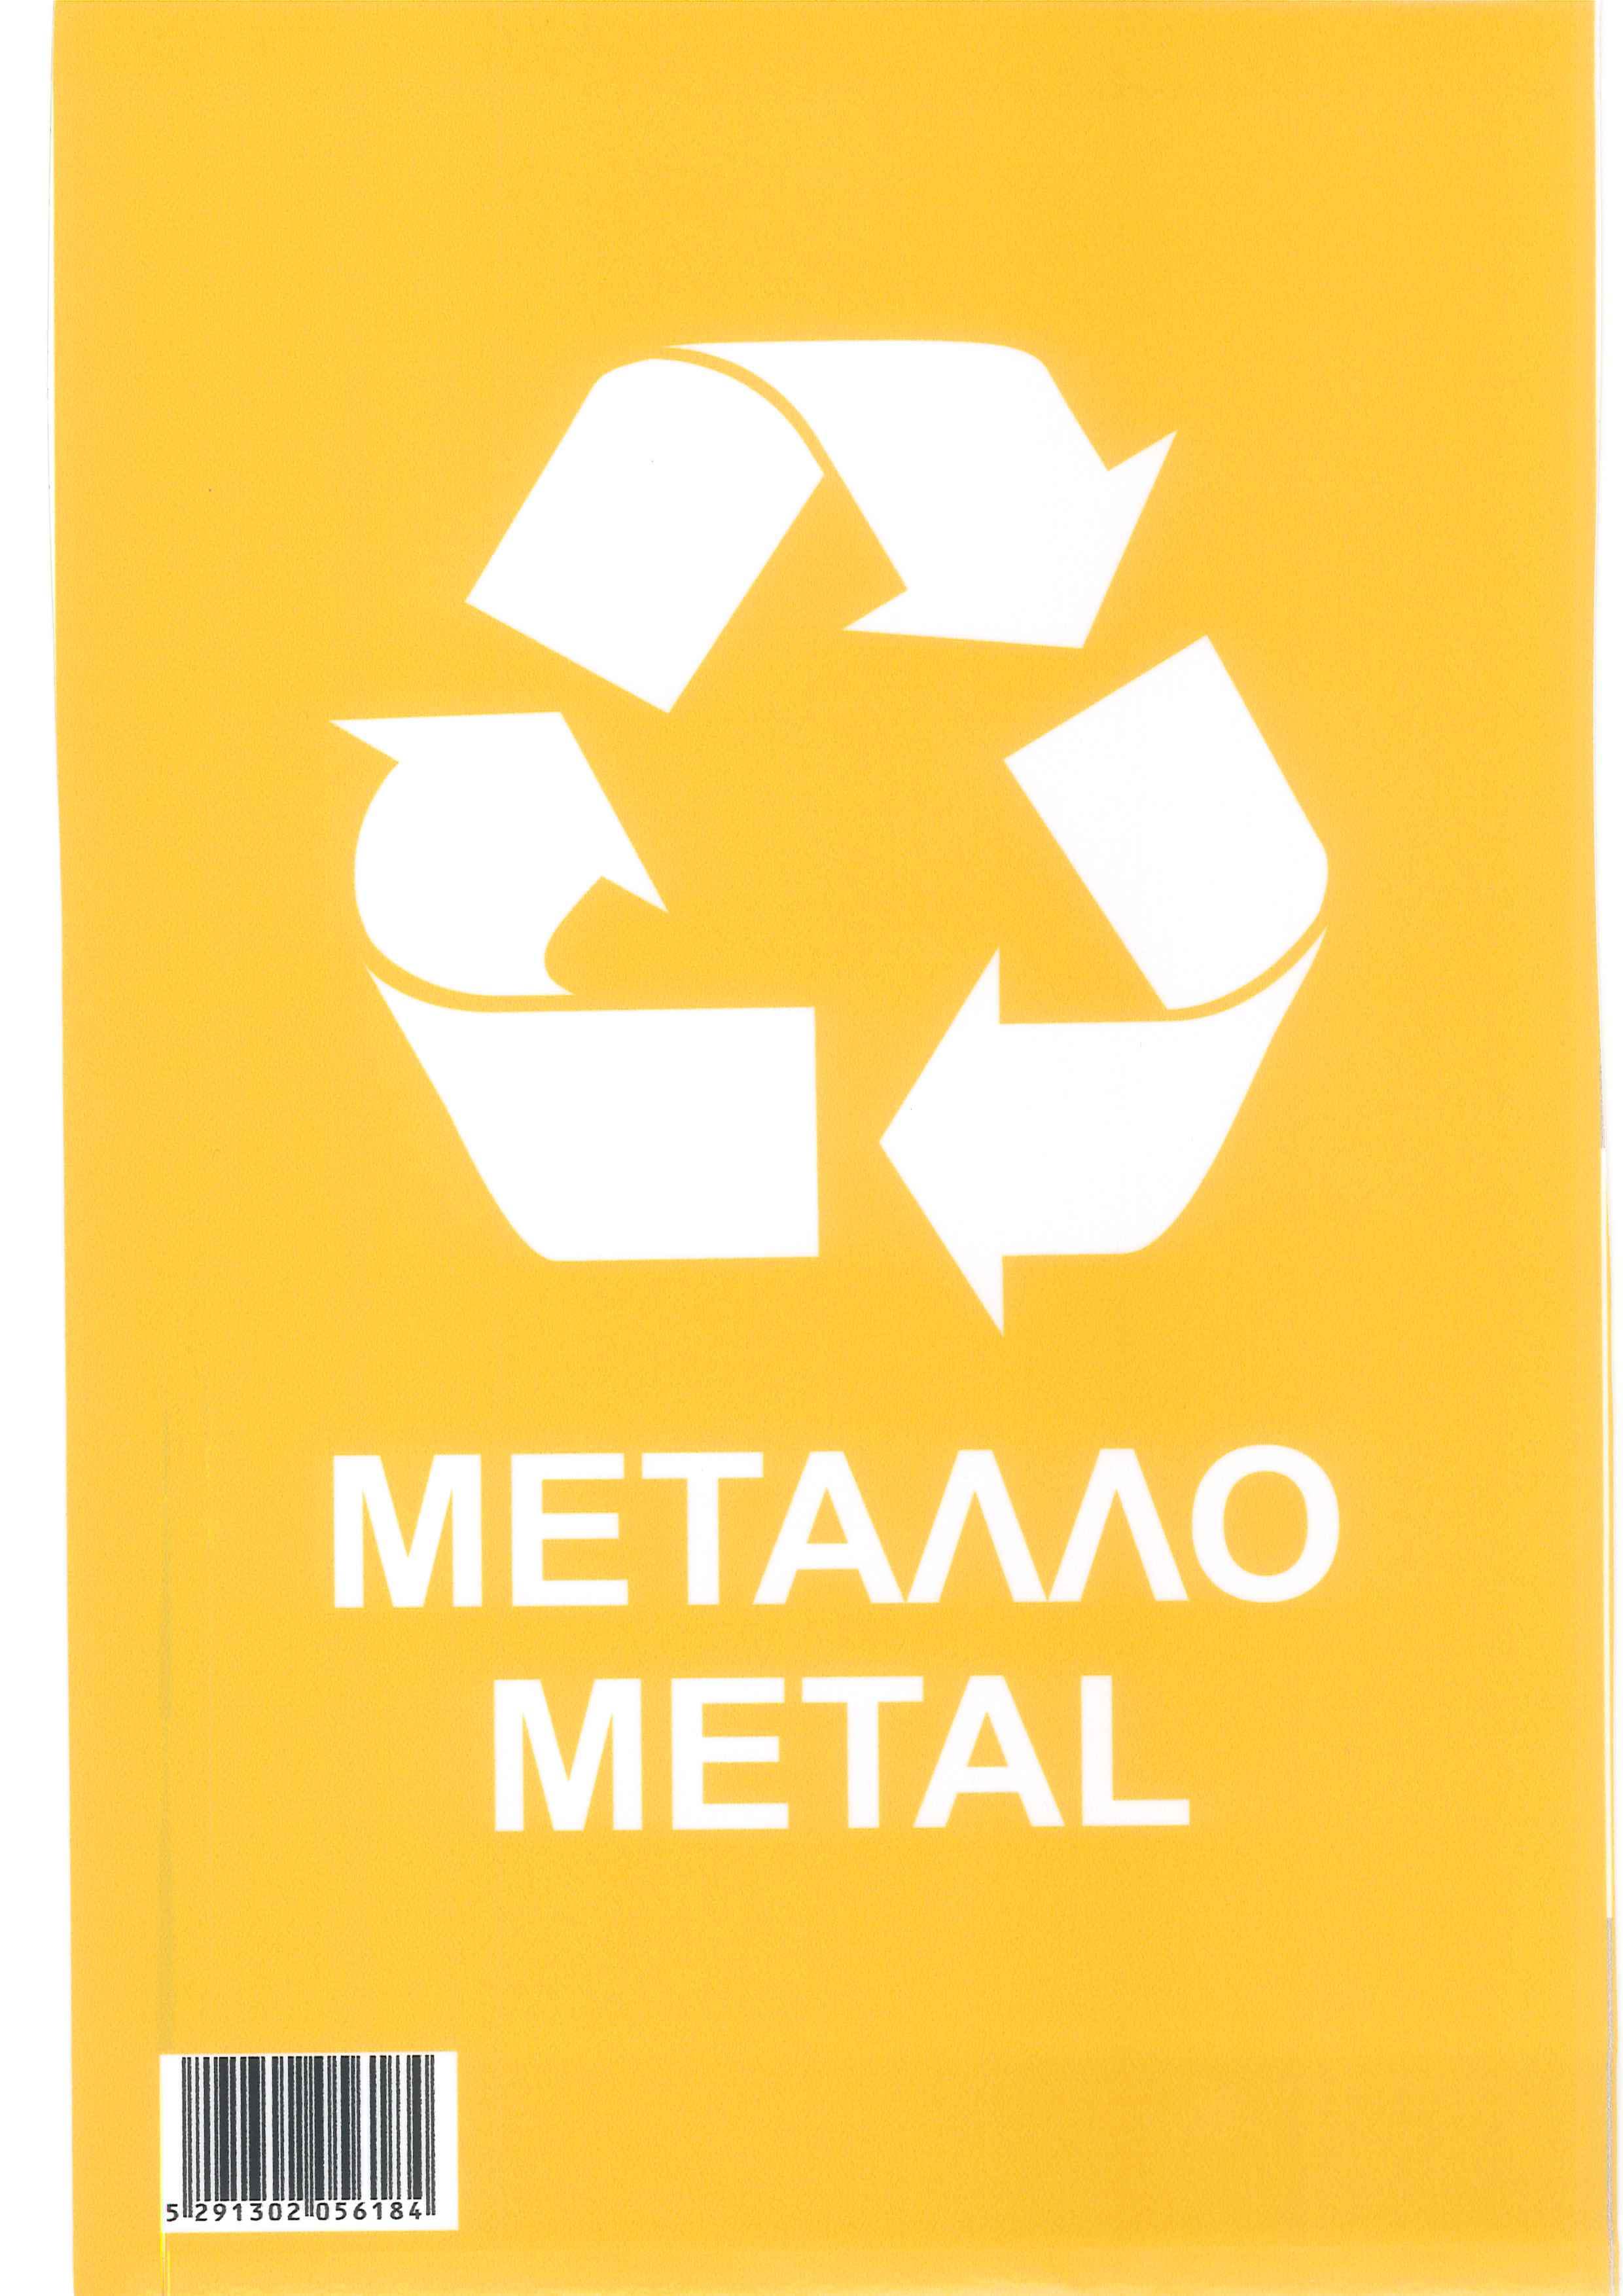 RECYCLE STICKERS FOR METAL